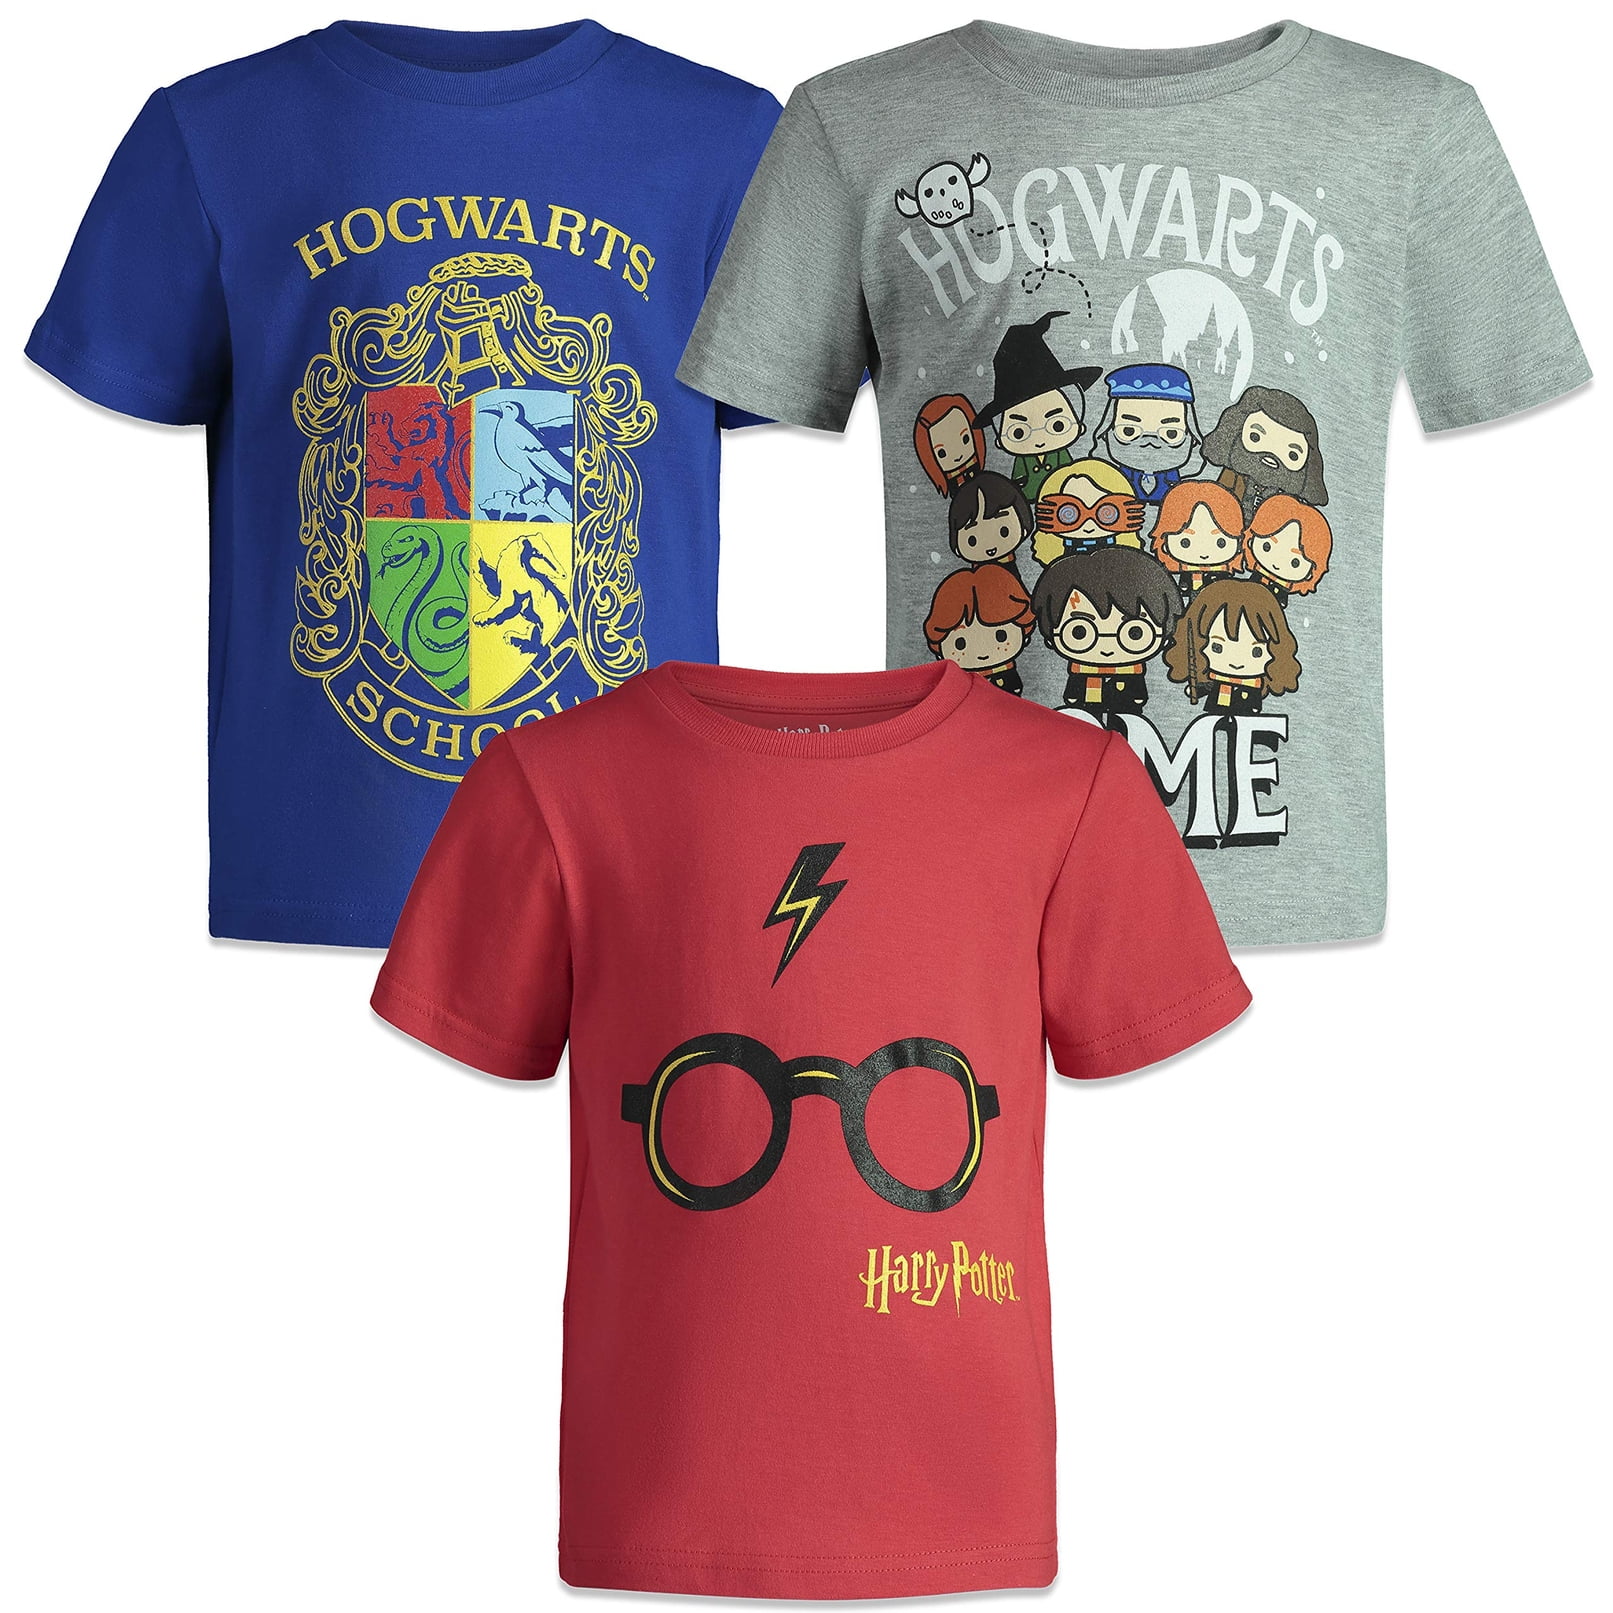 Potter 7 Hogwarts Jersey Big Boys Youth Shirt Red Harry Potter Quidditch H 